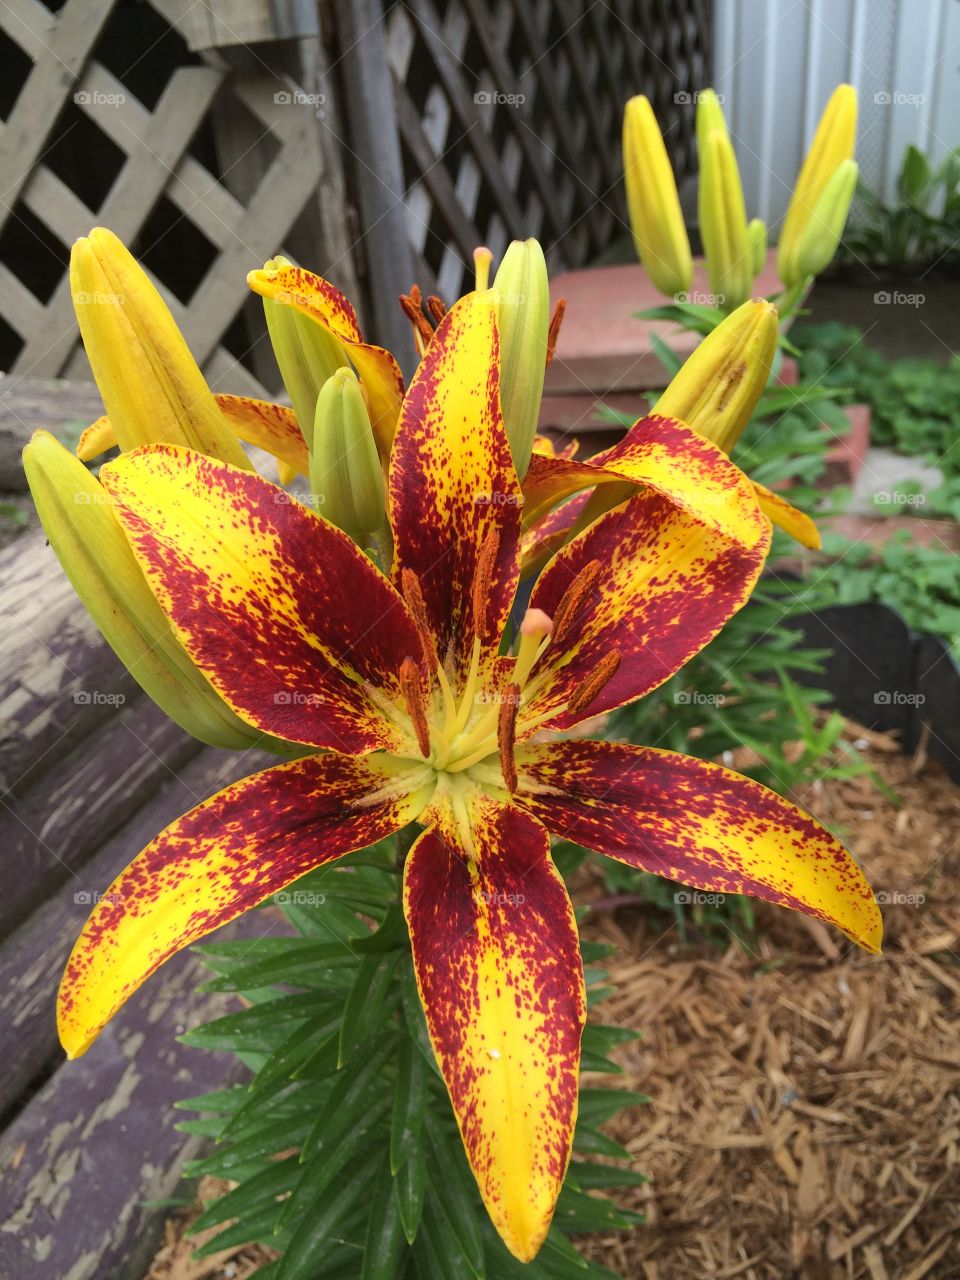 Tiger lily. Freshly bloomed from my garden